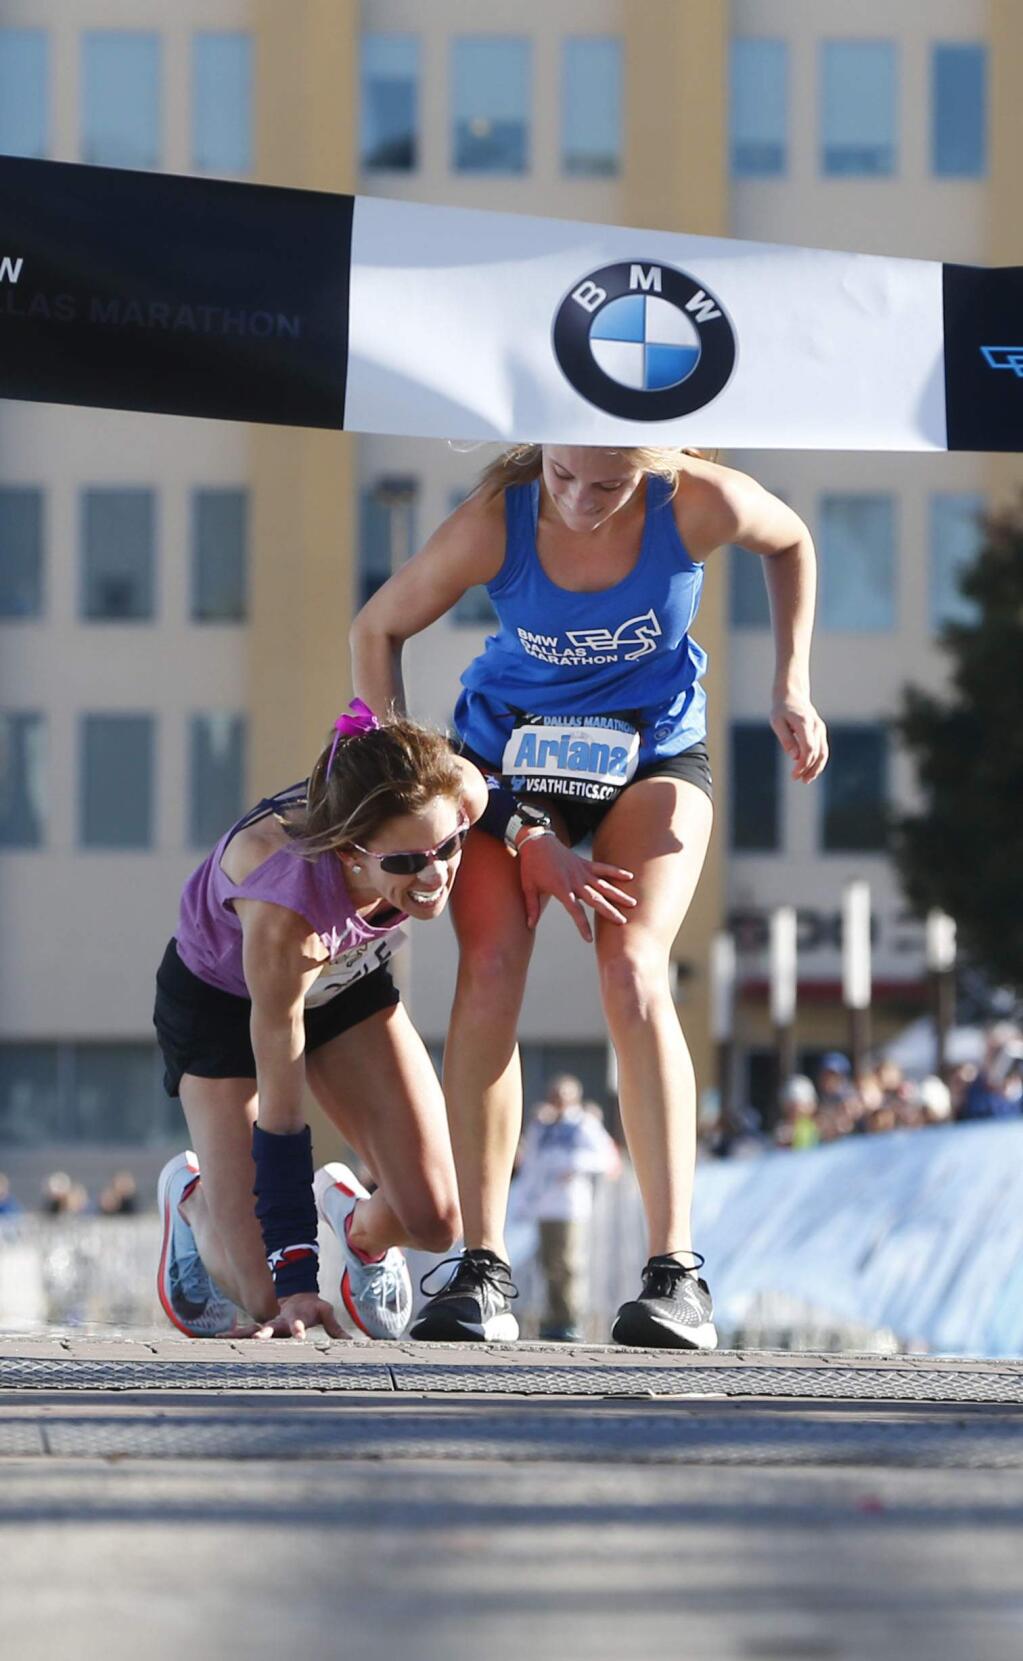 In this Sunday, Dec. 10, 2017, photo, Ariana Luterman, 17, right, helps Chandler Self at the finish line during the BMW Dallas Marathon in Dallas. (Nathan Hunsinger/The Dallas Morning News via AP)